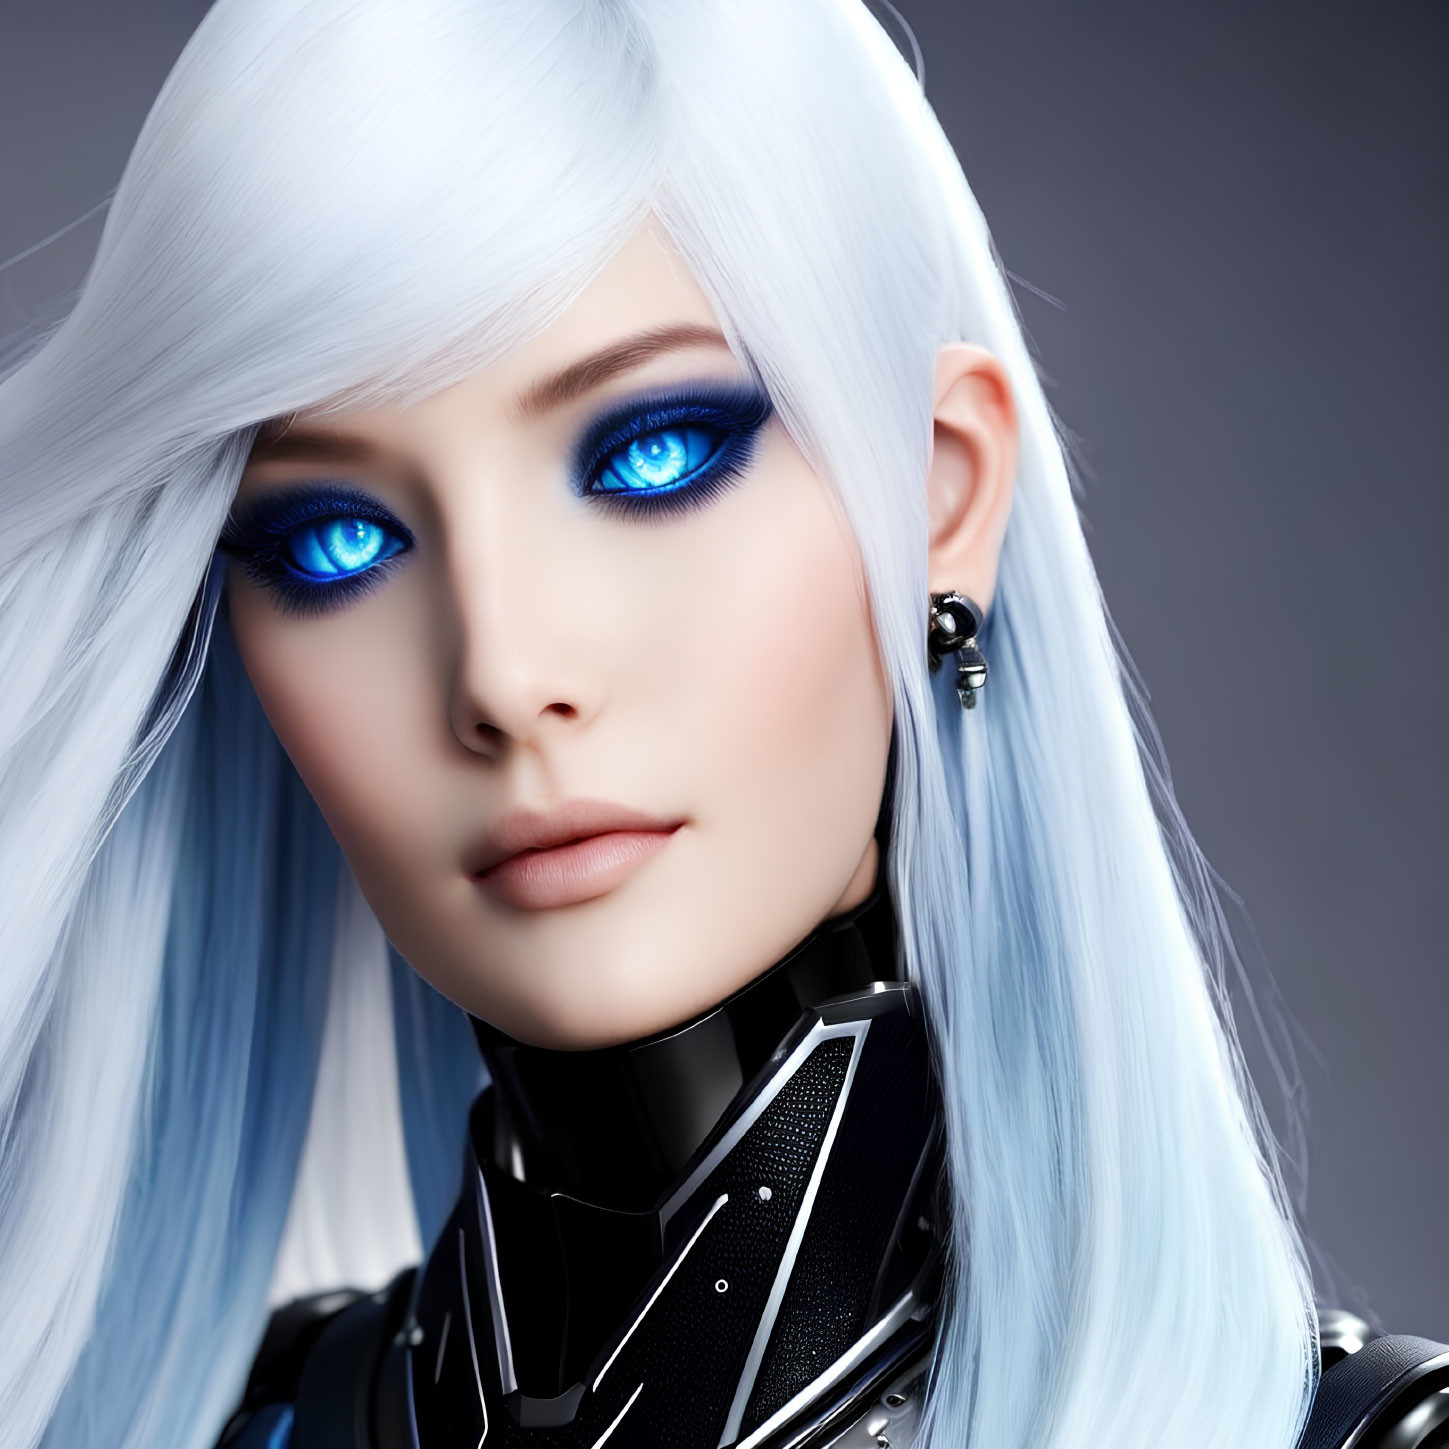 Digital art portrait of female character with blue eyes, white hair, and futuristic black armor.